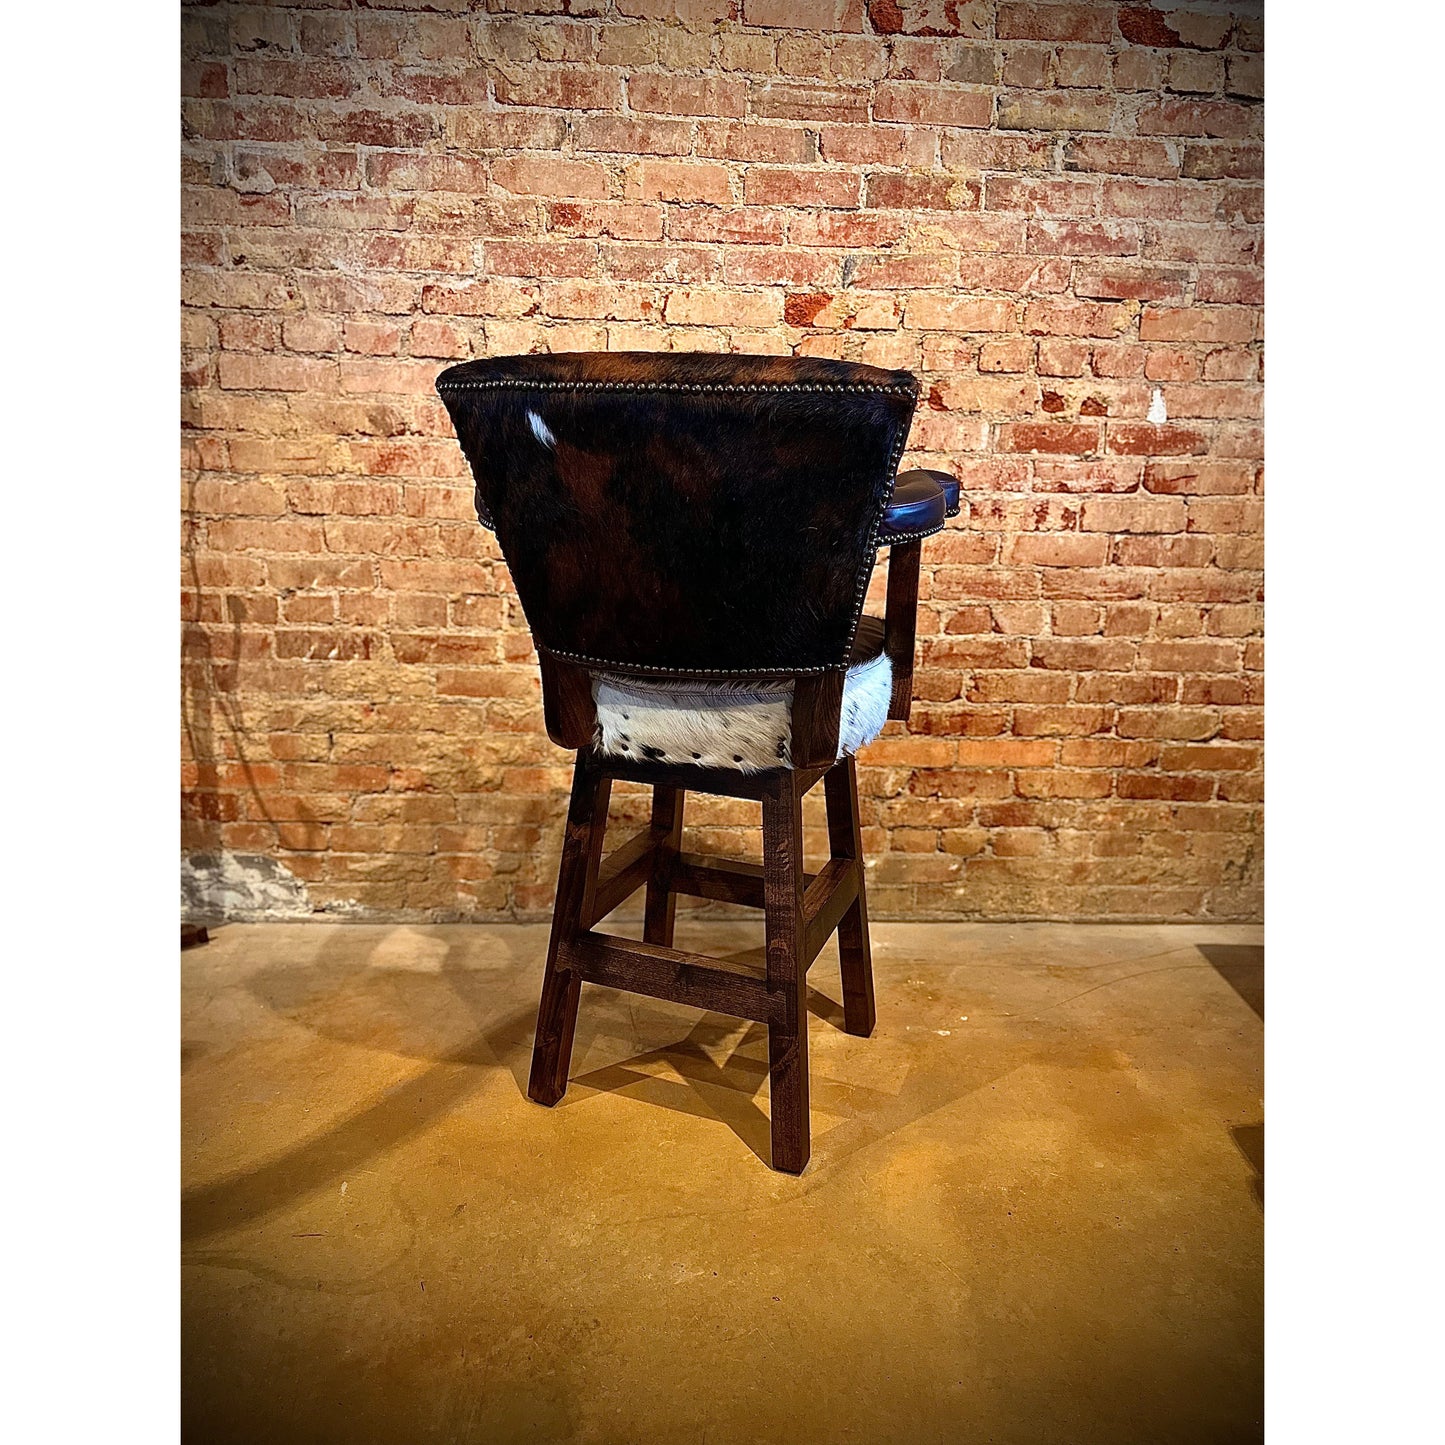 Experience ultimate comfort with our Cowhide Chisum Barstool. Crafted with genuine cowhide, these barstools bring a touch of western style to any room. Relax and enjoy a comfortable seat while adding a unique and stylish touch to your home decor.